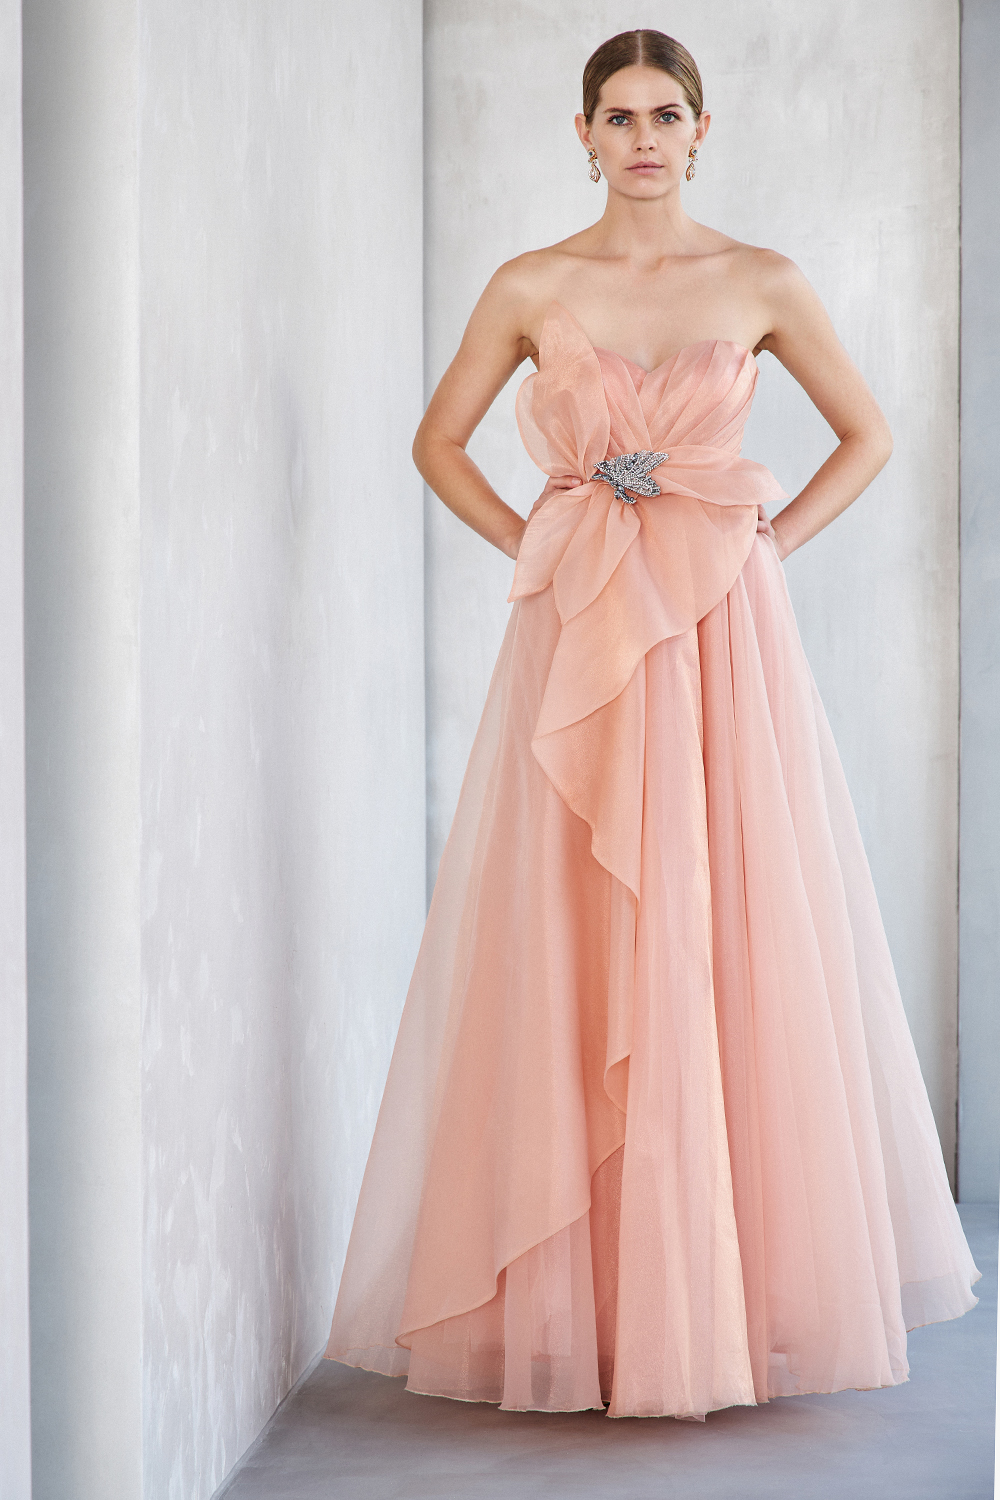 Evening Dresses / Long evening strapless dress with organza fabric and bow at the waist